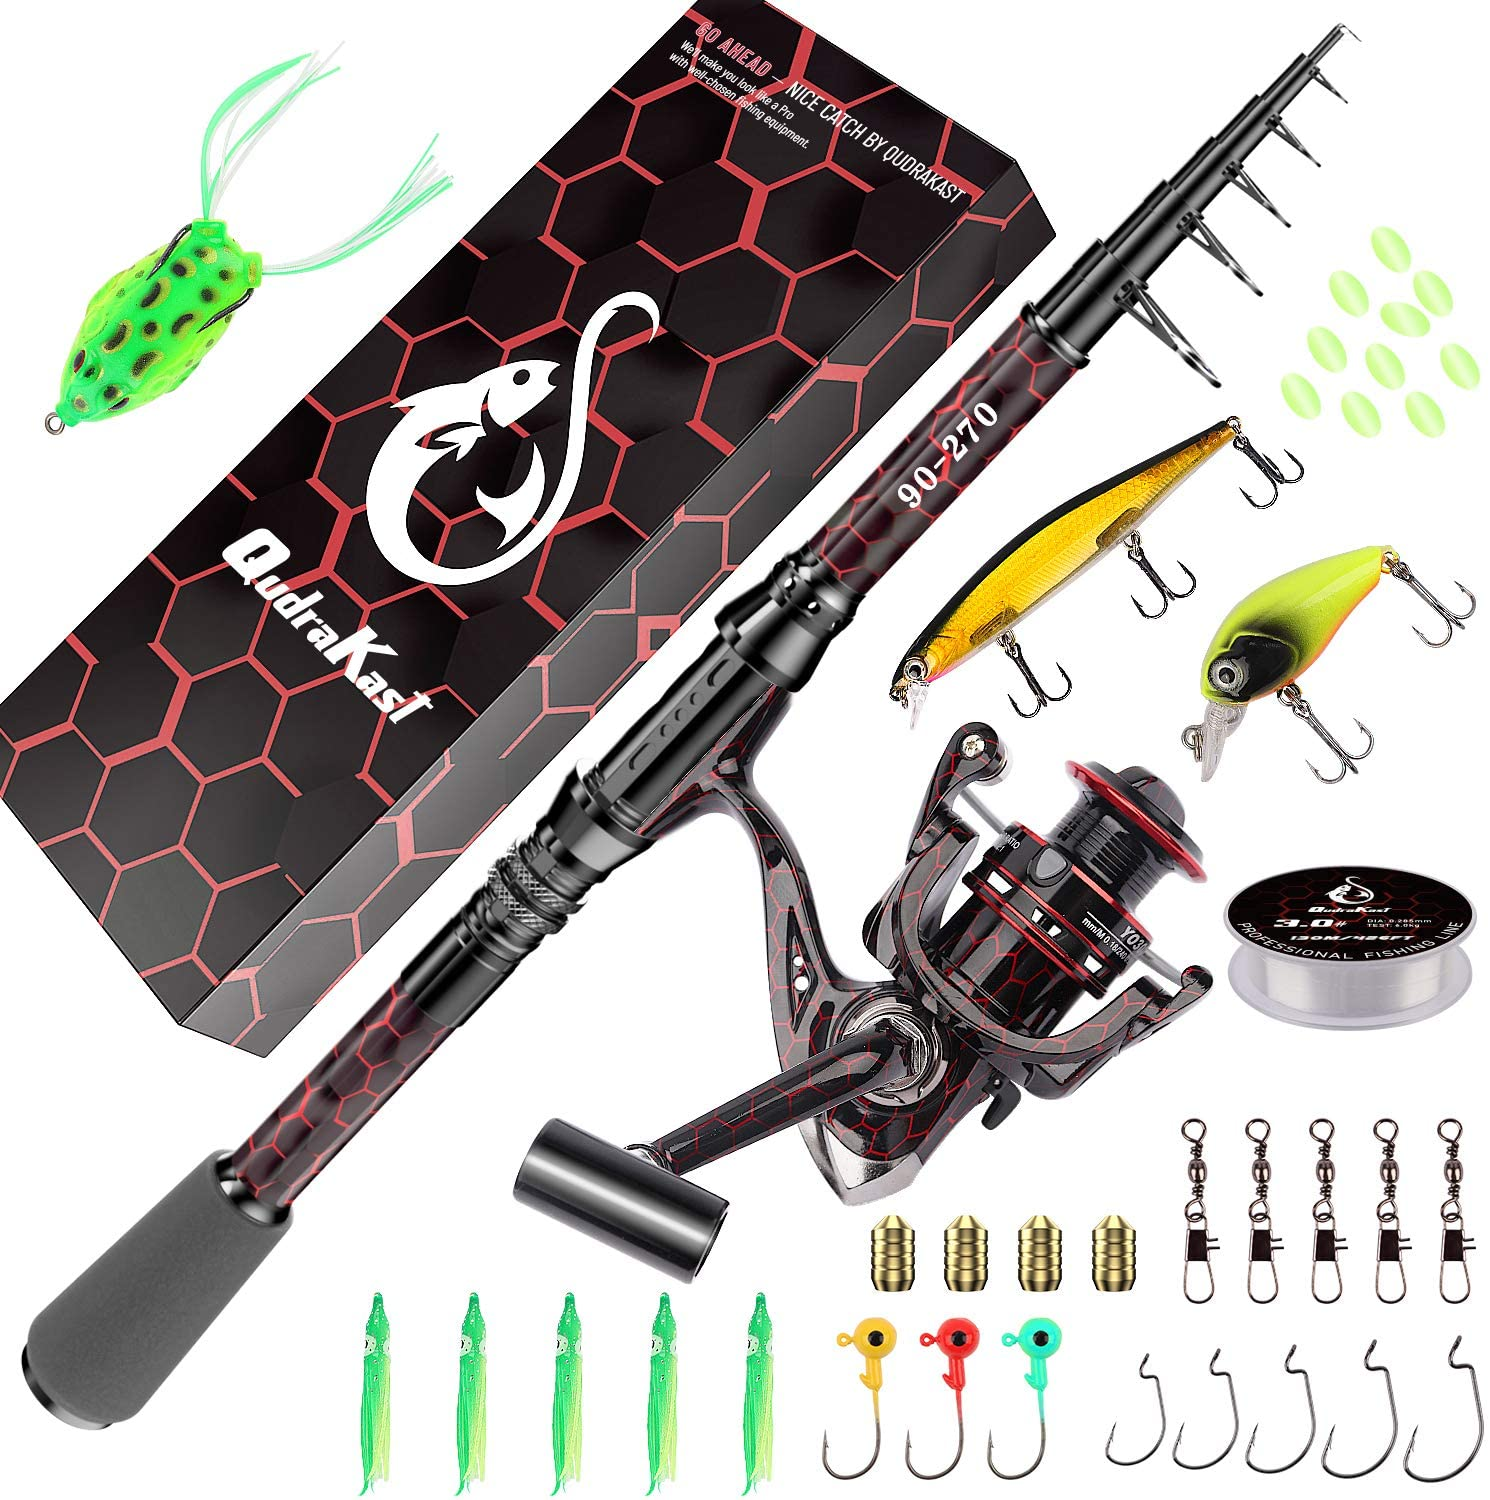 QudraKast Fishing Rod and Reel Combos, Unique Design with X-Warping Painting, Carbon Fiber Telescopic Fishing Rod with Reel Combo Kit with Tackle Box